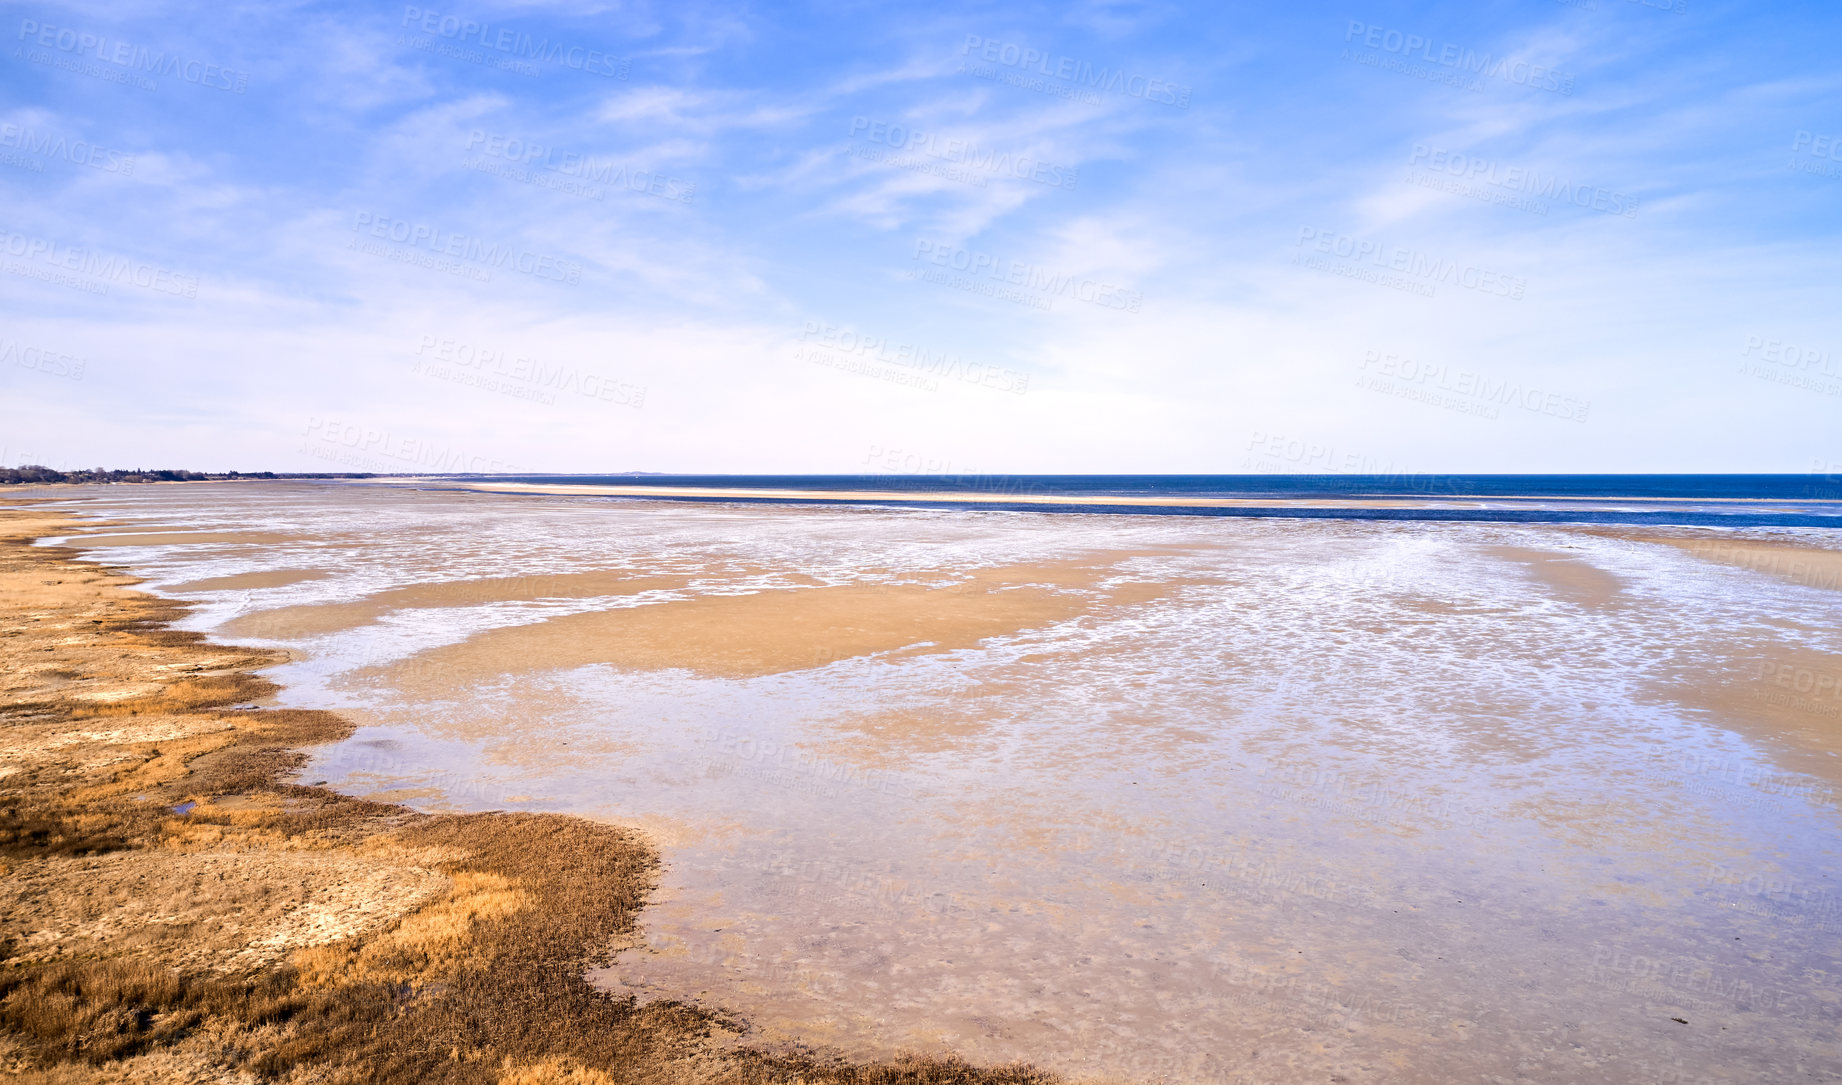 Buy stock photo Landscape of beach sand with ocean and blue cloudy sky background on the Eastcoast shoreline line Kattegat, Jutland, near Mariager fjord, Denmark. Scenic view of sea water on sand during the tide 